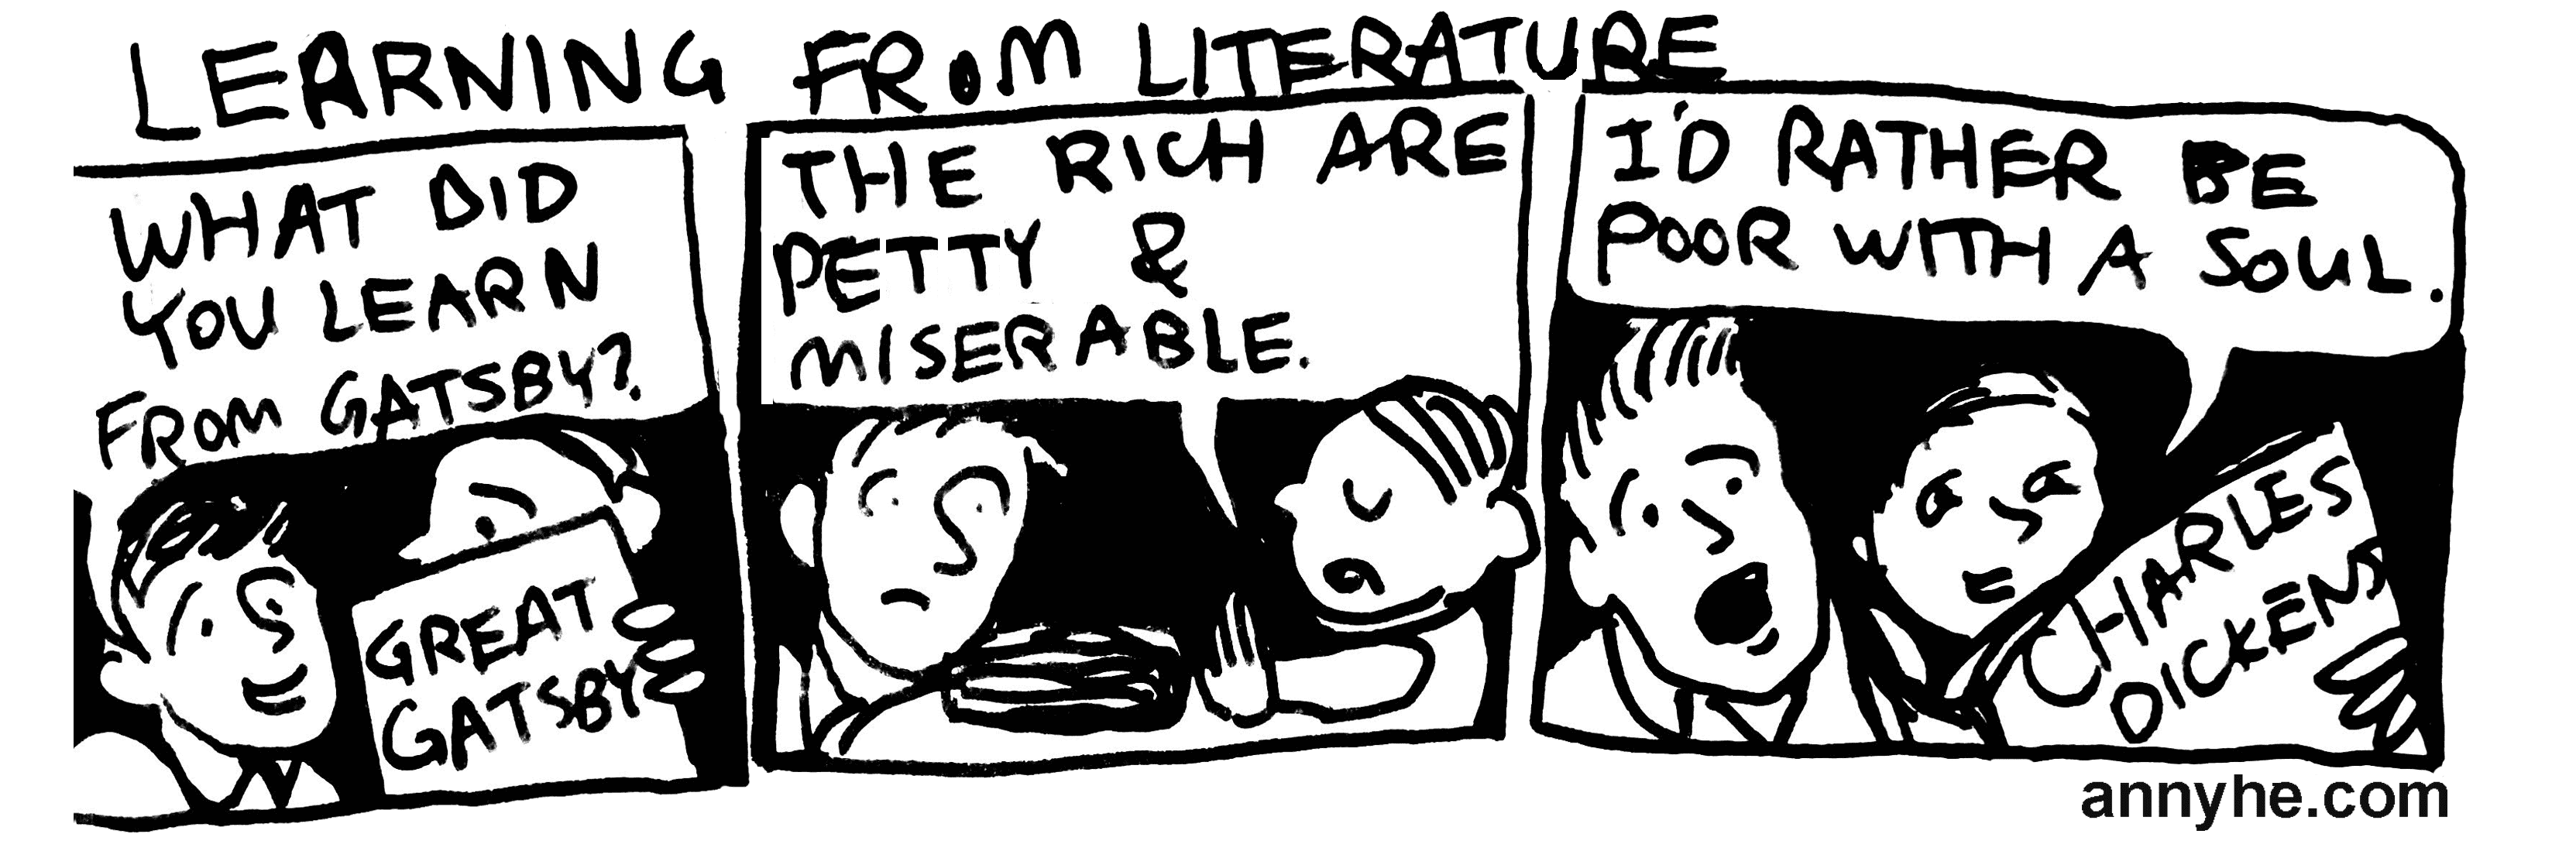 Learning from Literature